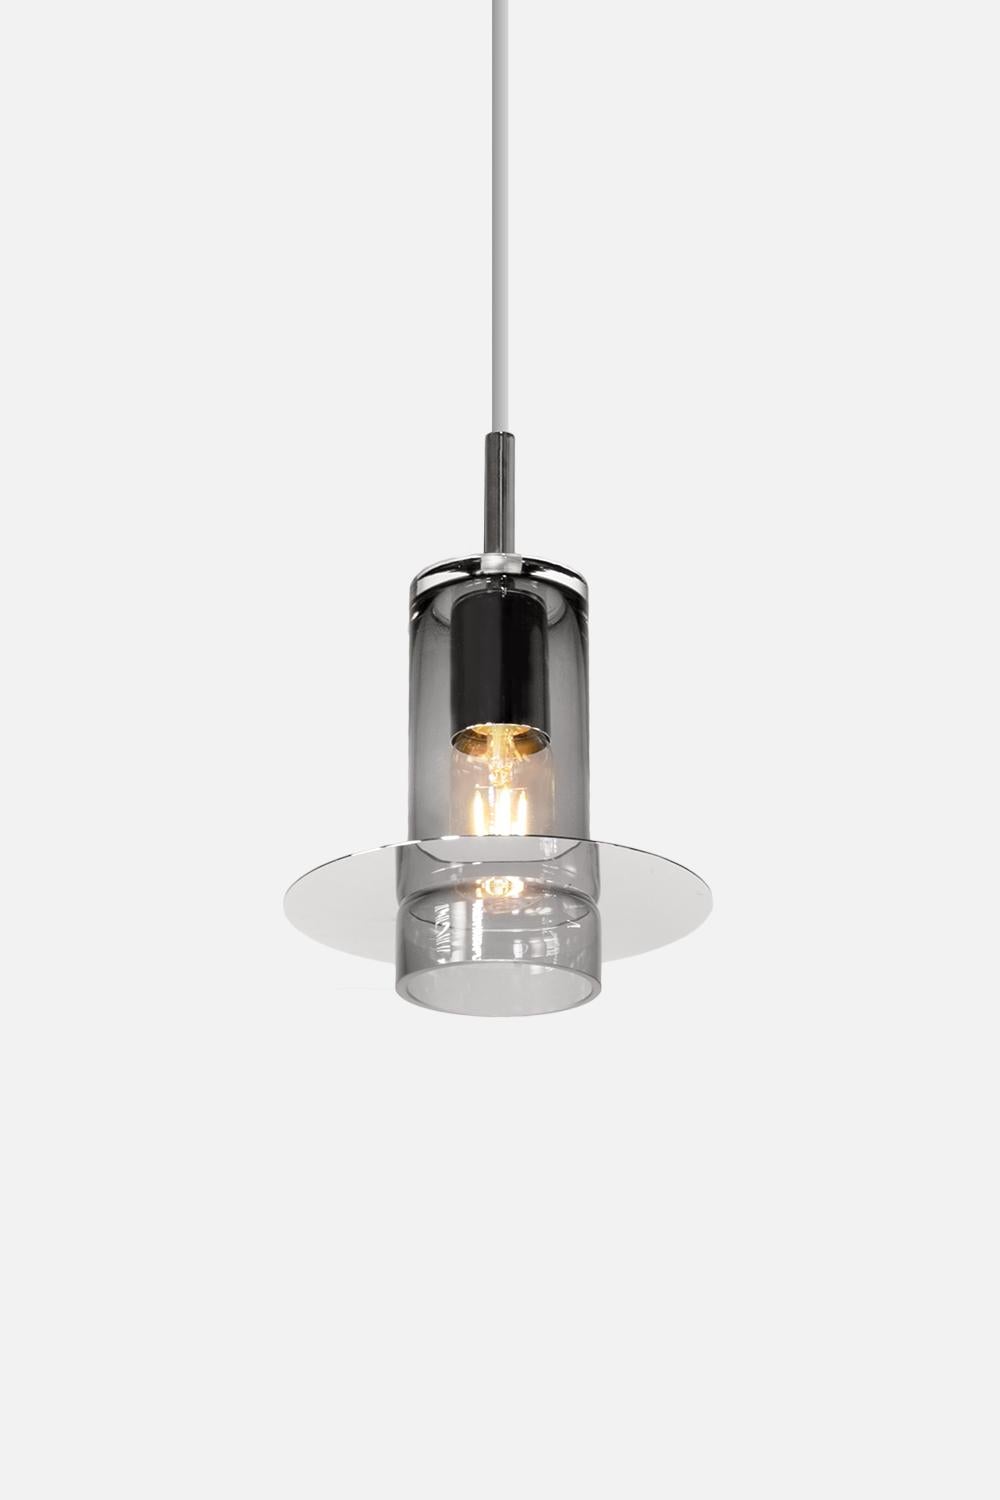 Blown glass pendant light by Eric Willemart
Materials: Grey blown glass, Polished silver or brass or copper Plating
Light specifications: Socket E27, Filament Bulb 20W (optional)
Ceiling rose: Silver or brass or copper-plated cylinder